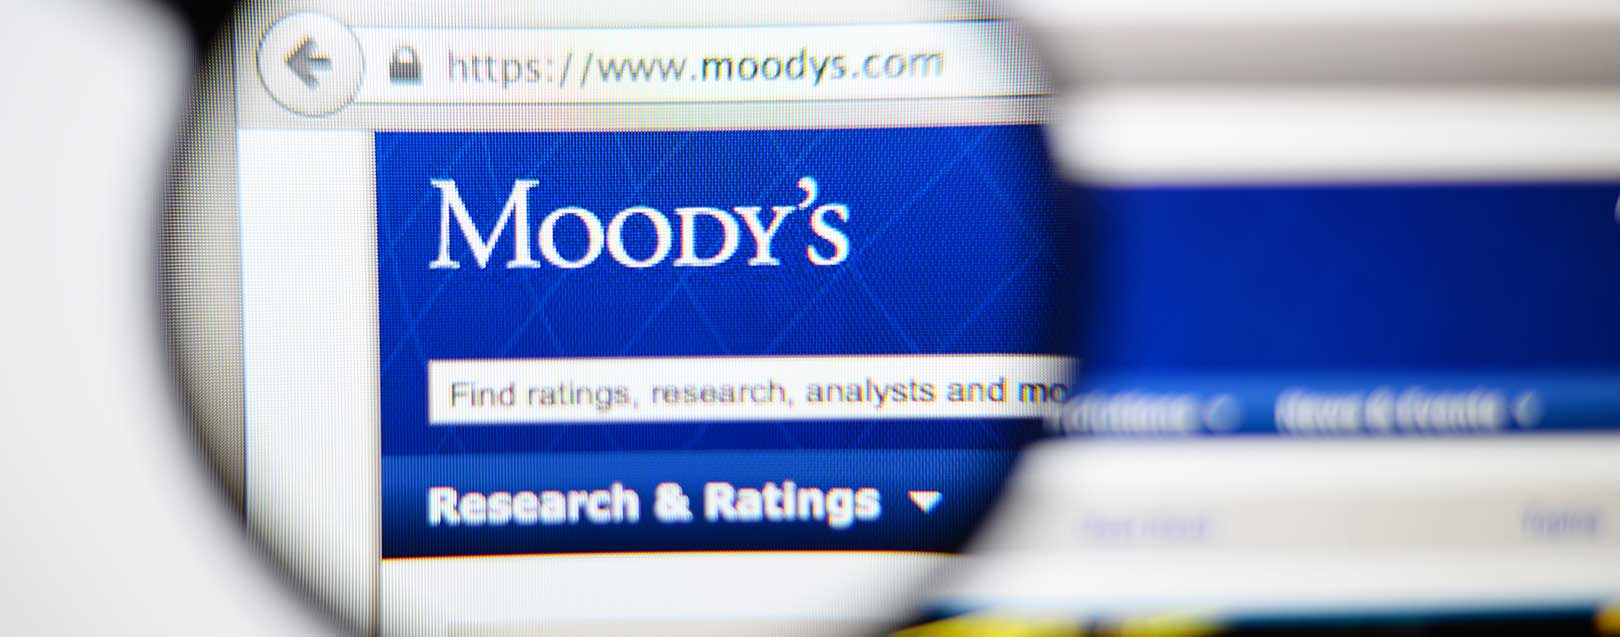 Demonetisation beneficial, but implementation may slow down GDP growth: Moody's